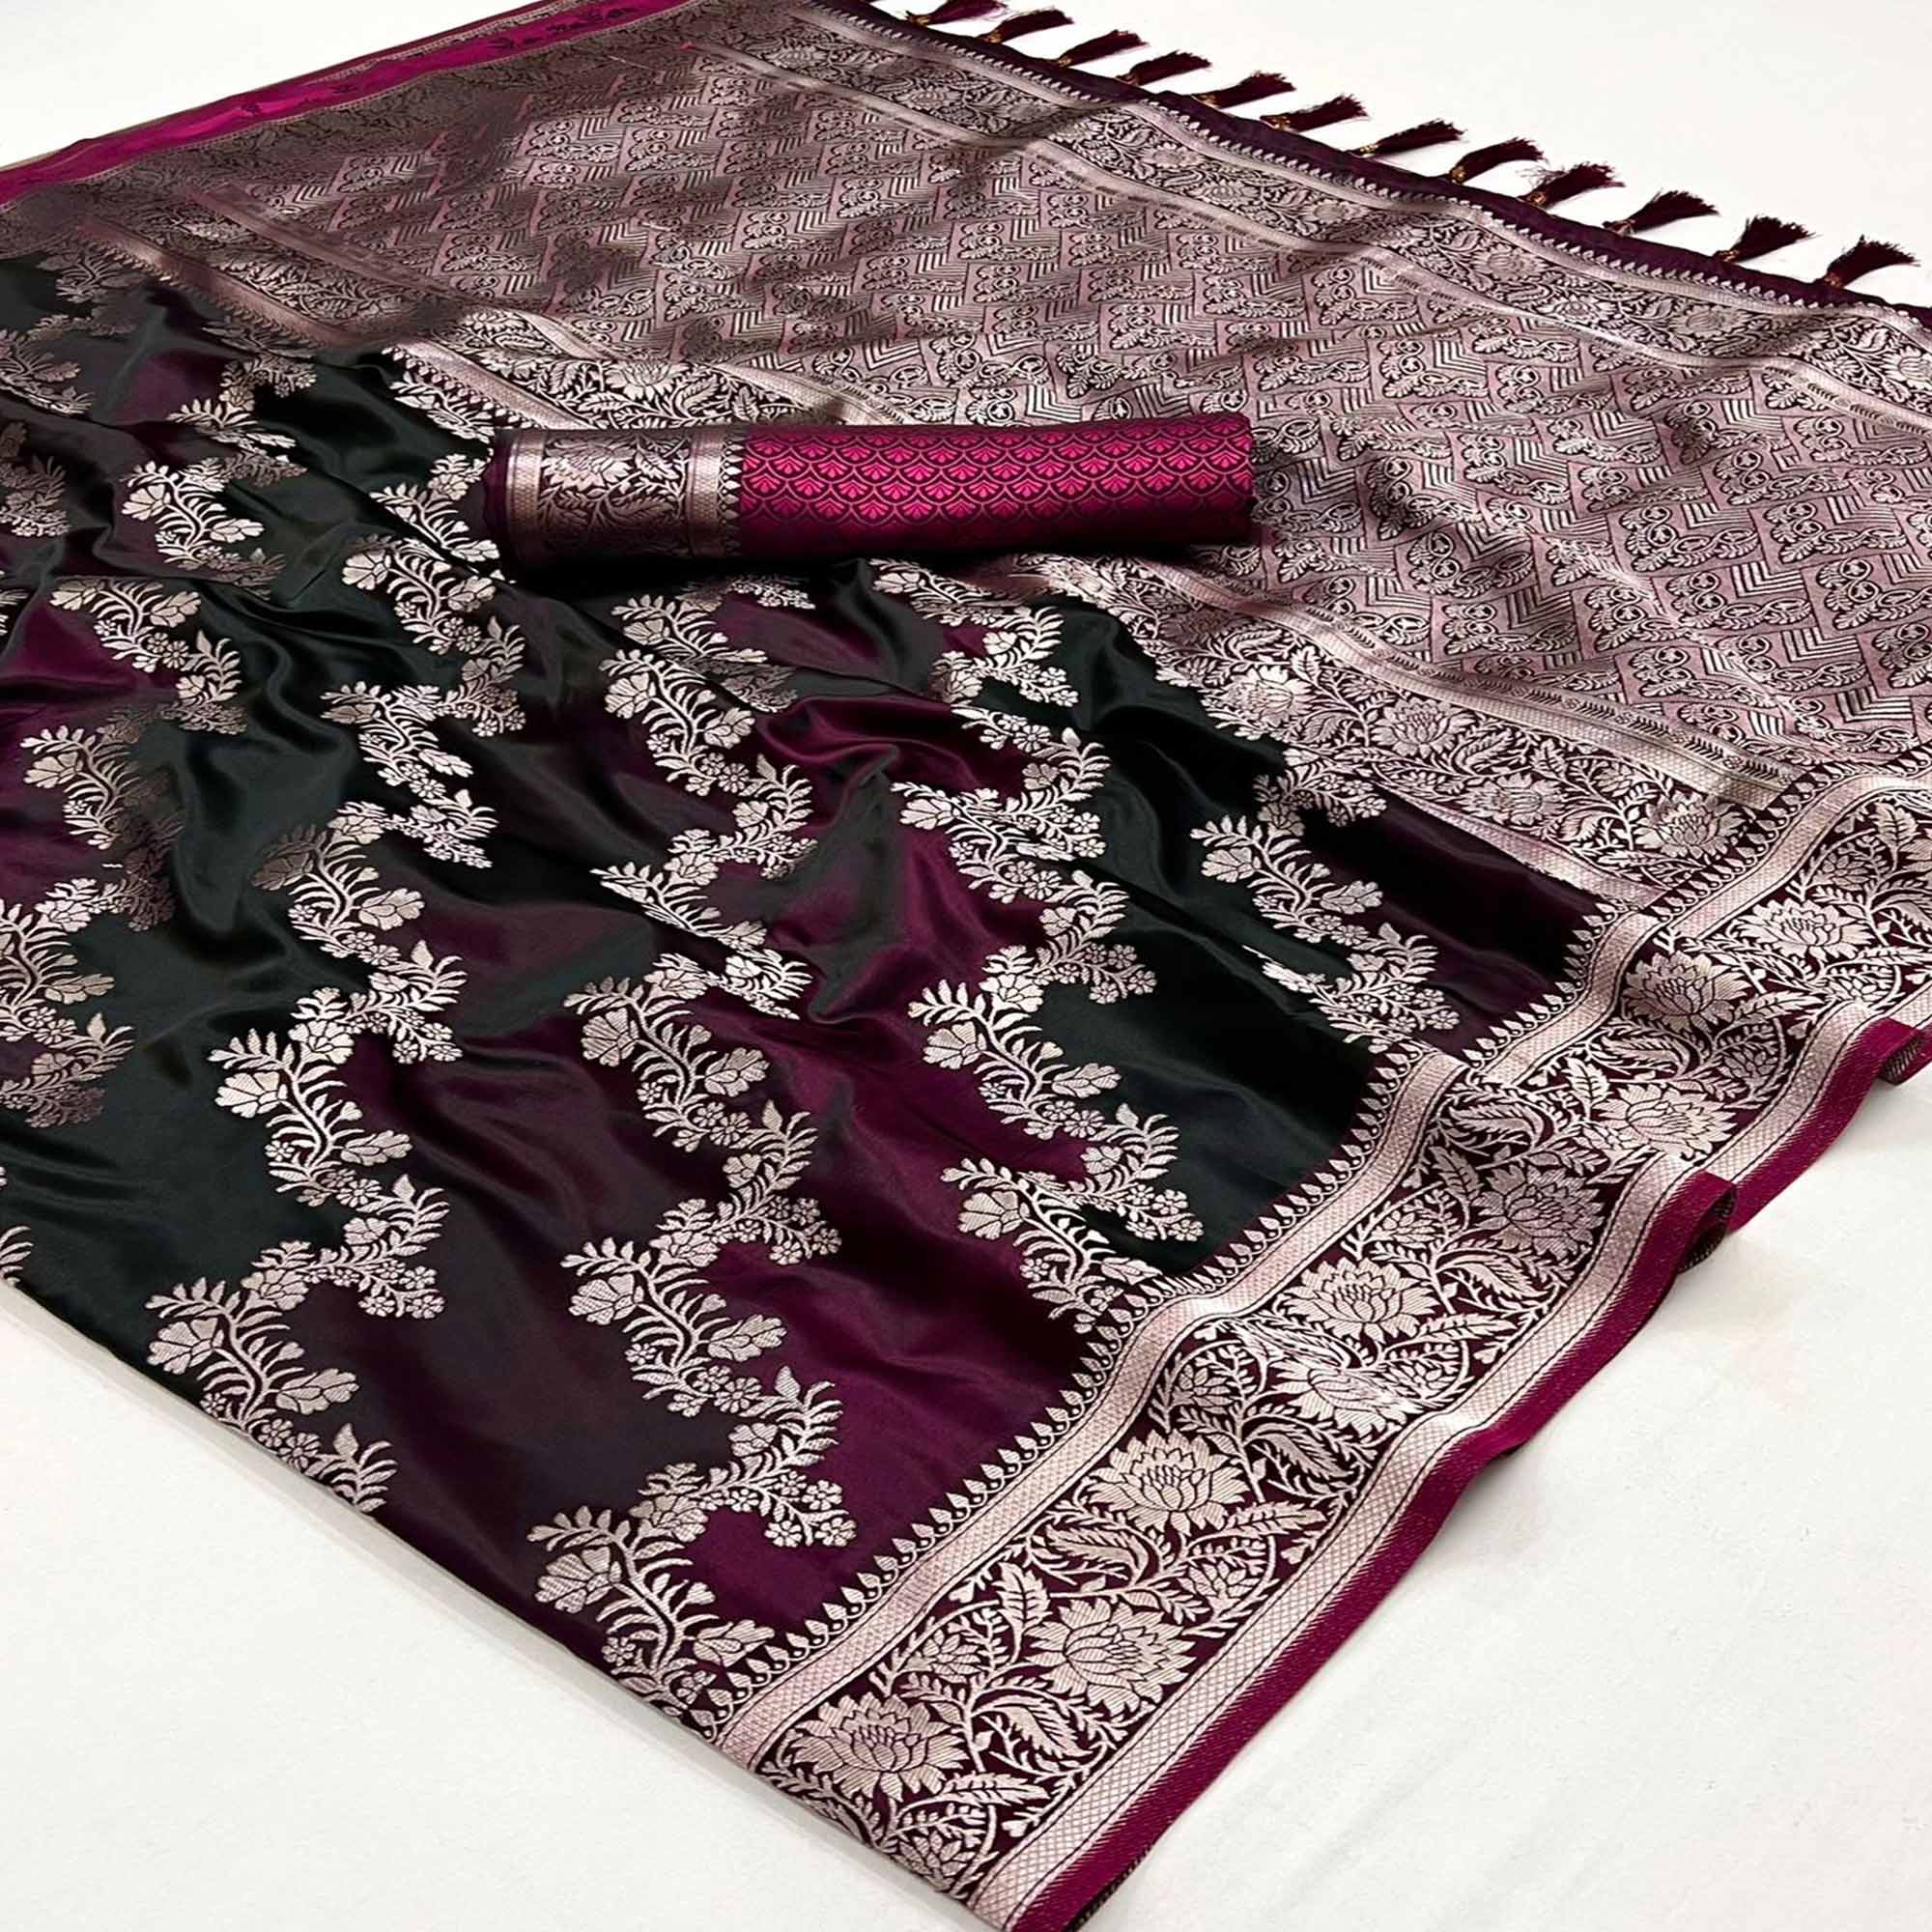 Wine Floral Woven Satin Saree With Tassels